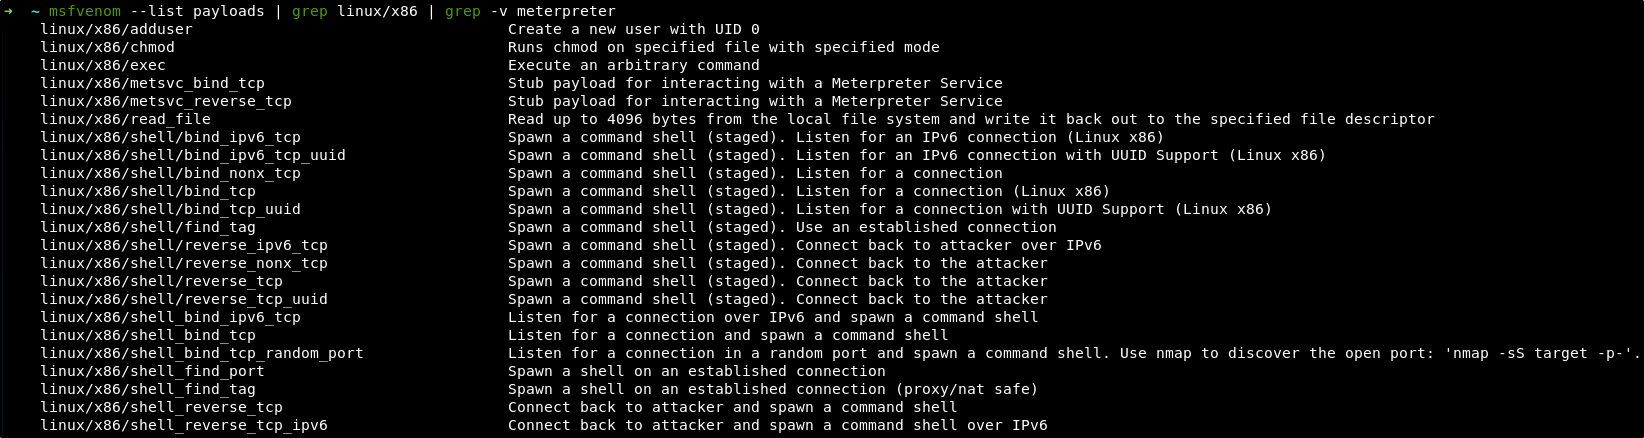 List of payloads without meterpreter for Linux x86